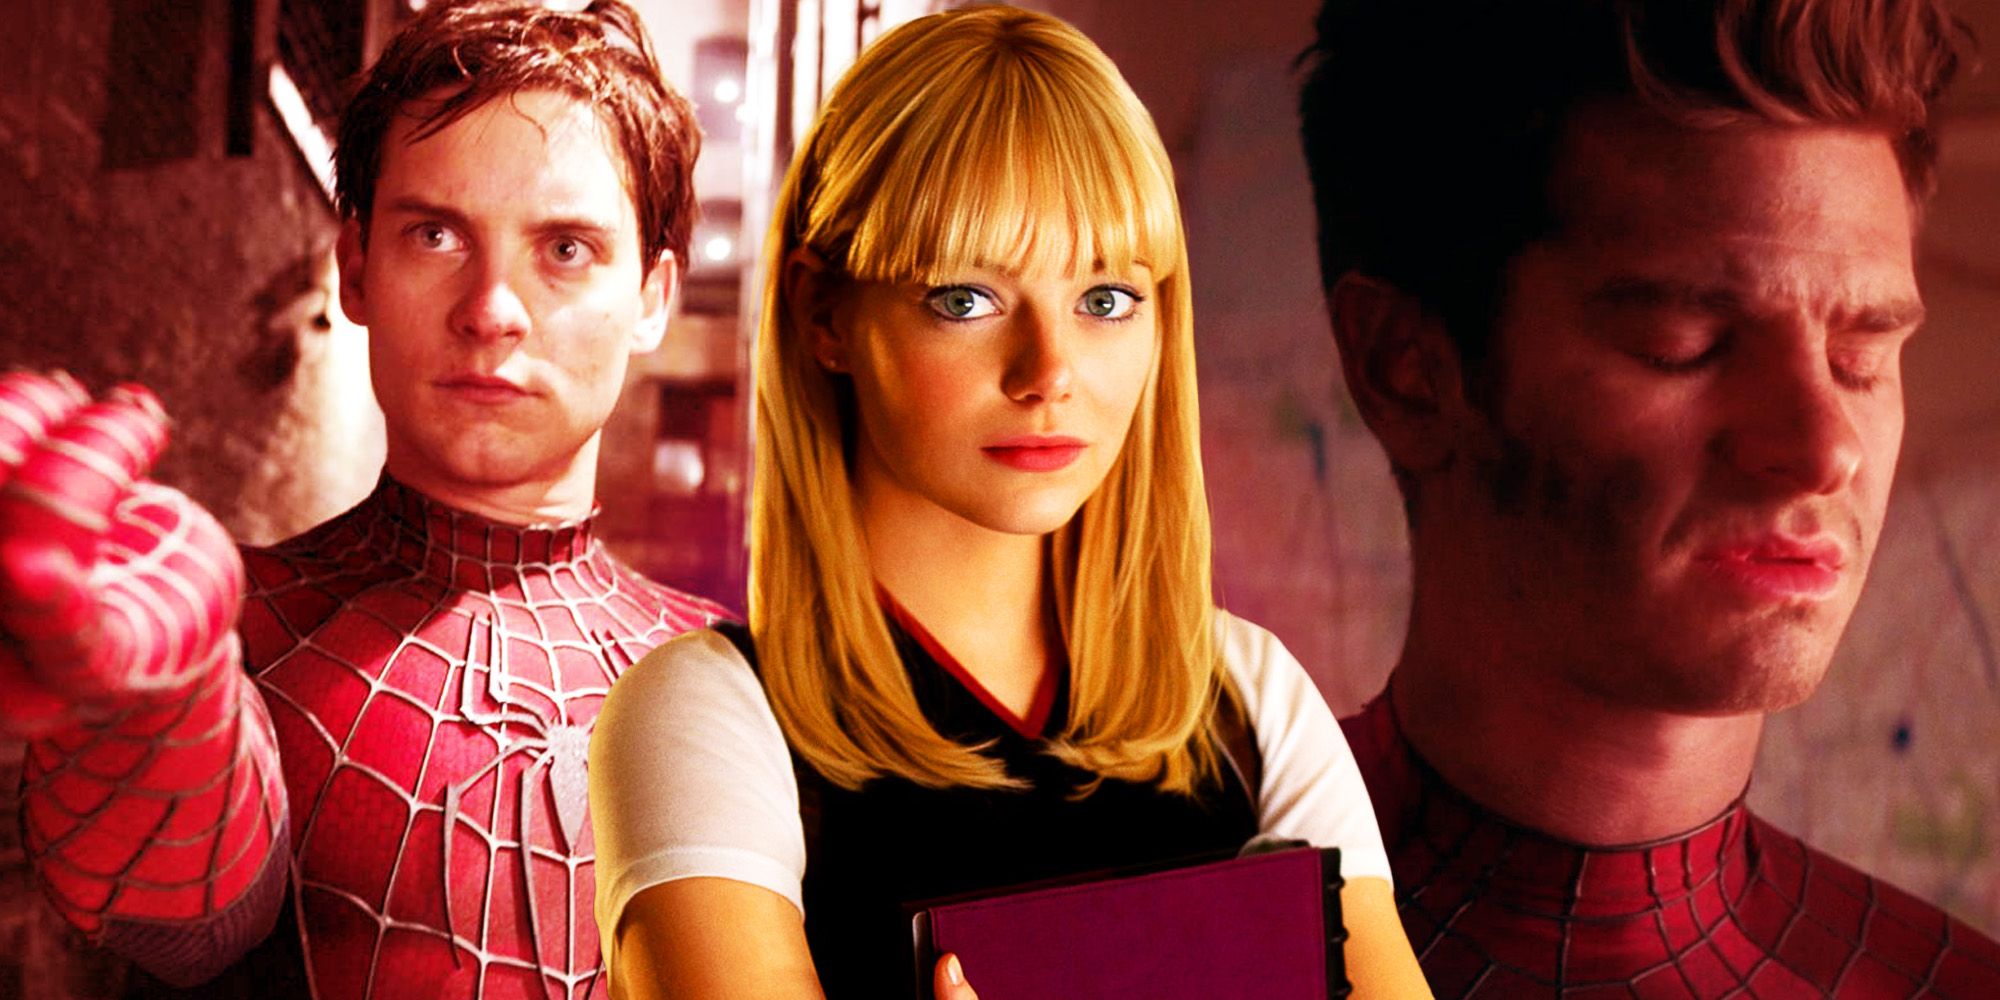 Spider-Man Tobey Maguire with Emma Stone as Gwen Stacy and Andrew Garfield